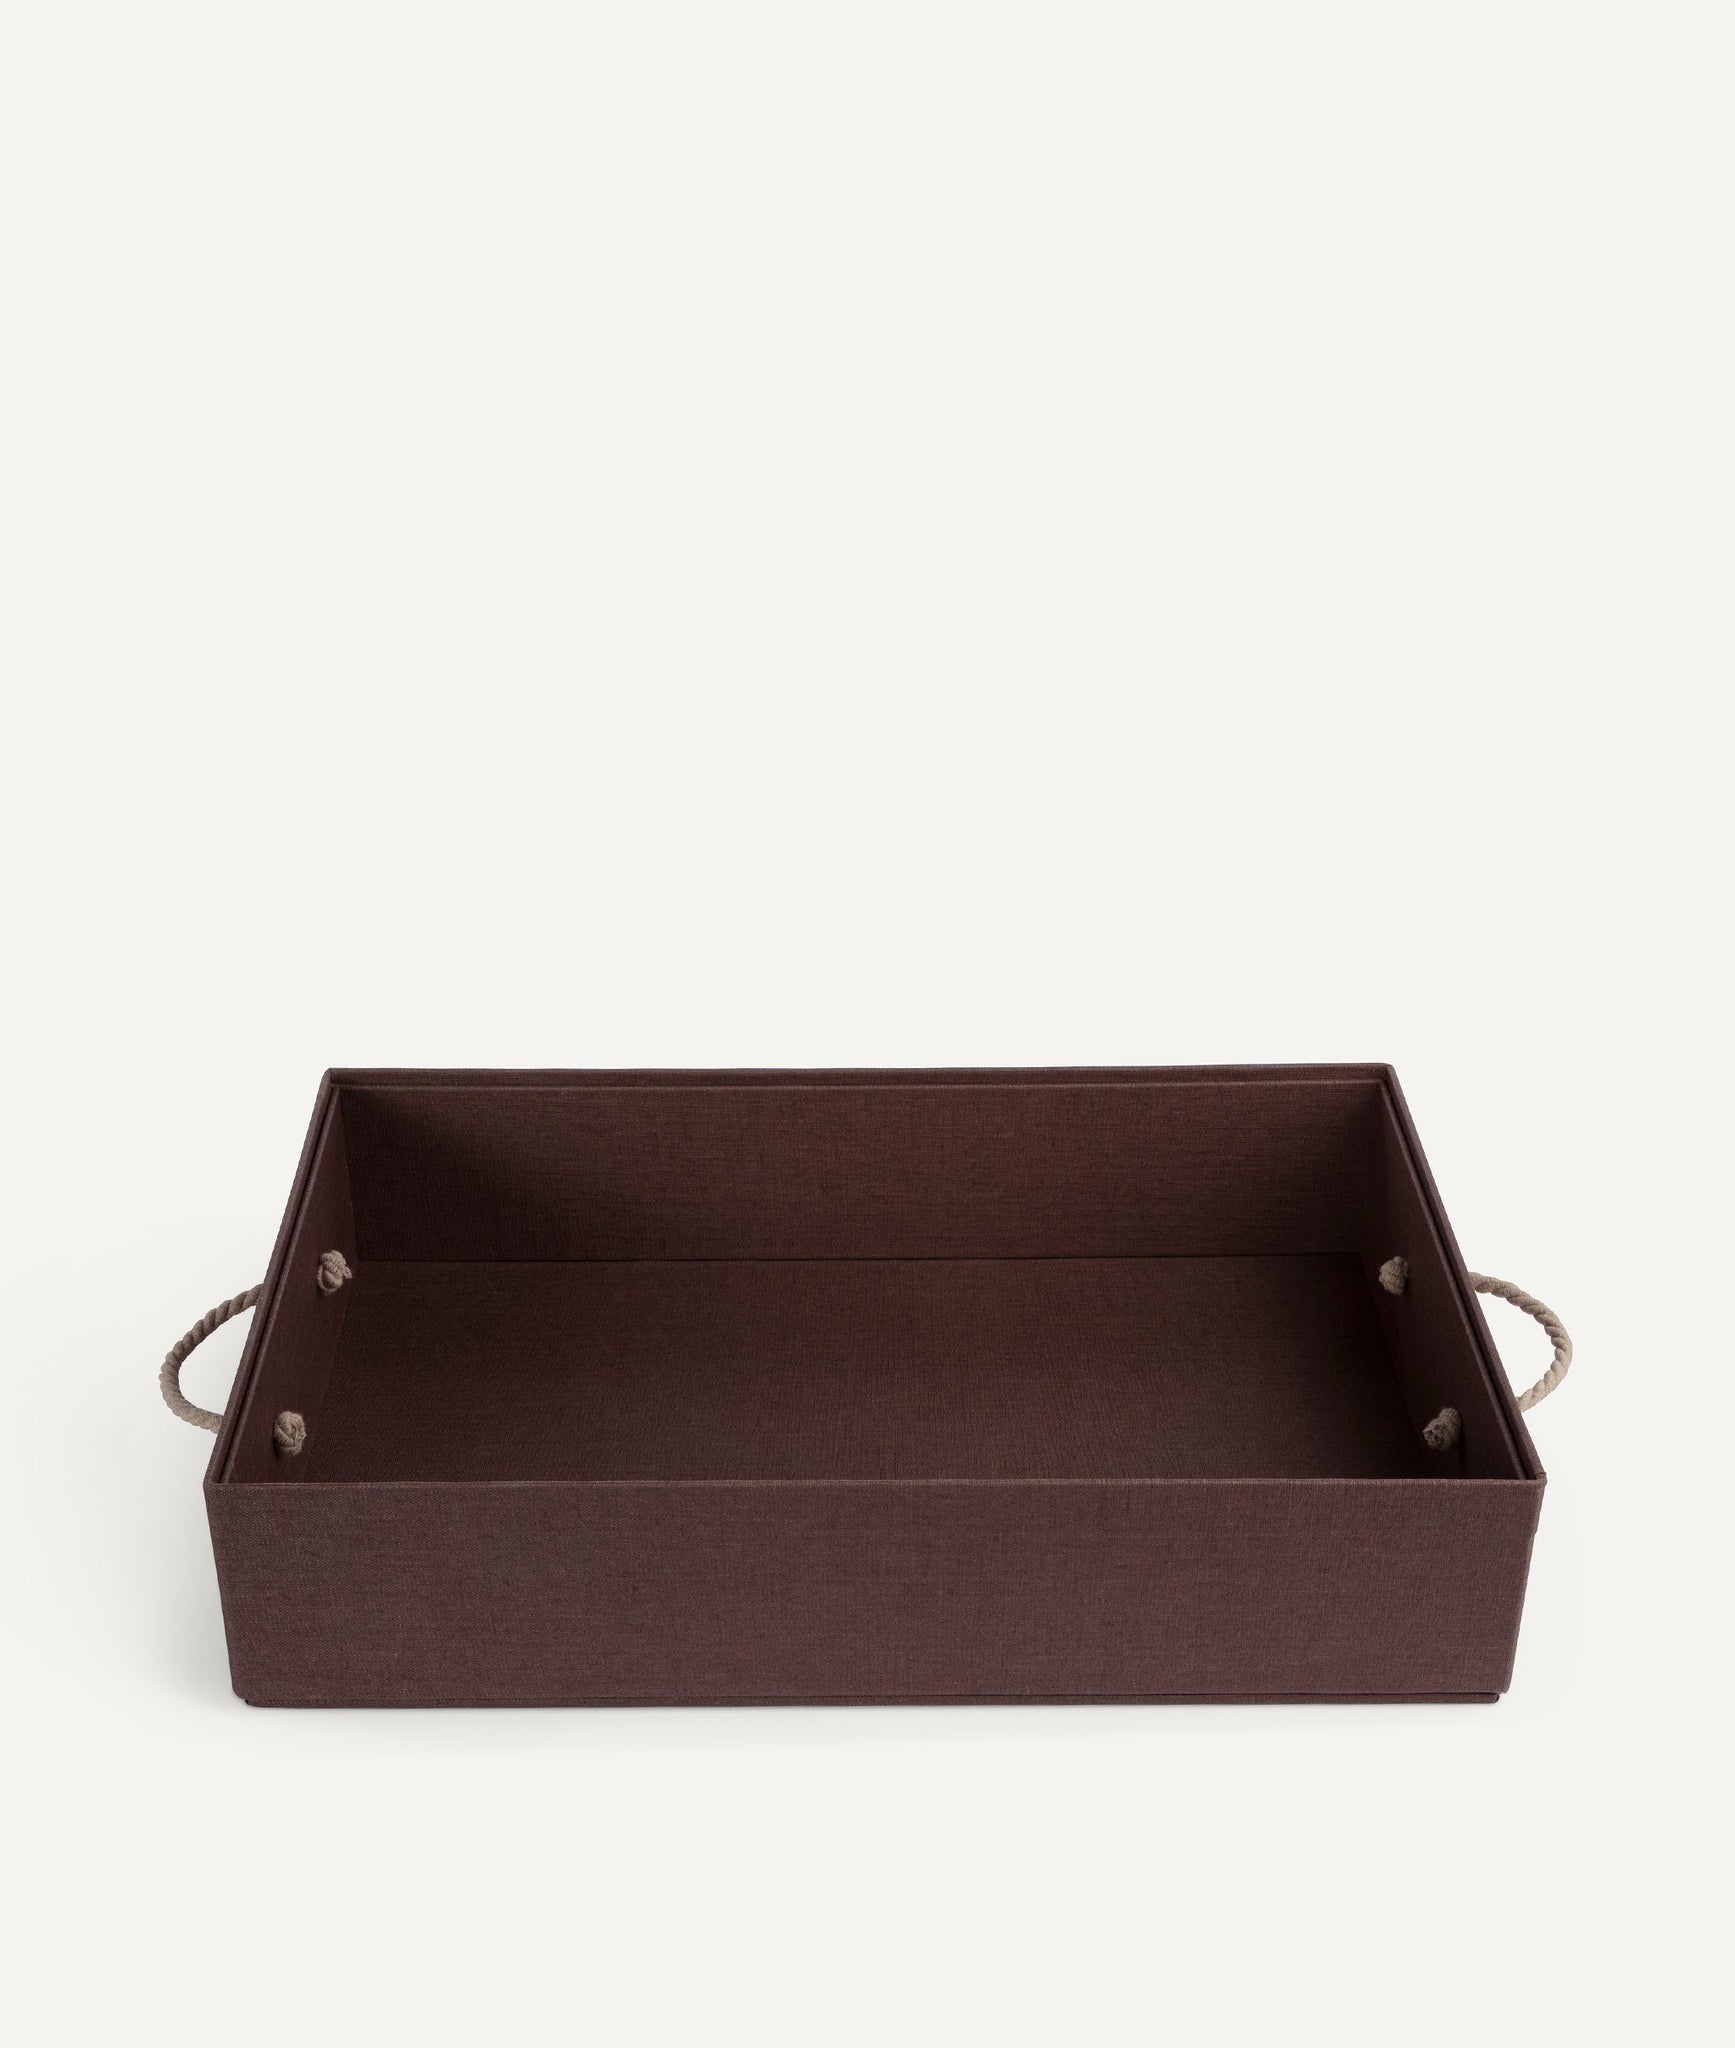 Tray With Handles in Linen